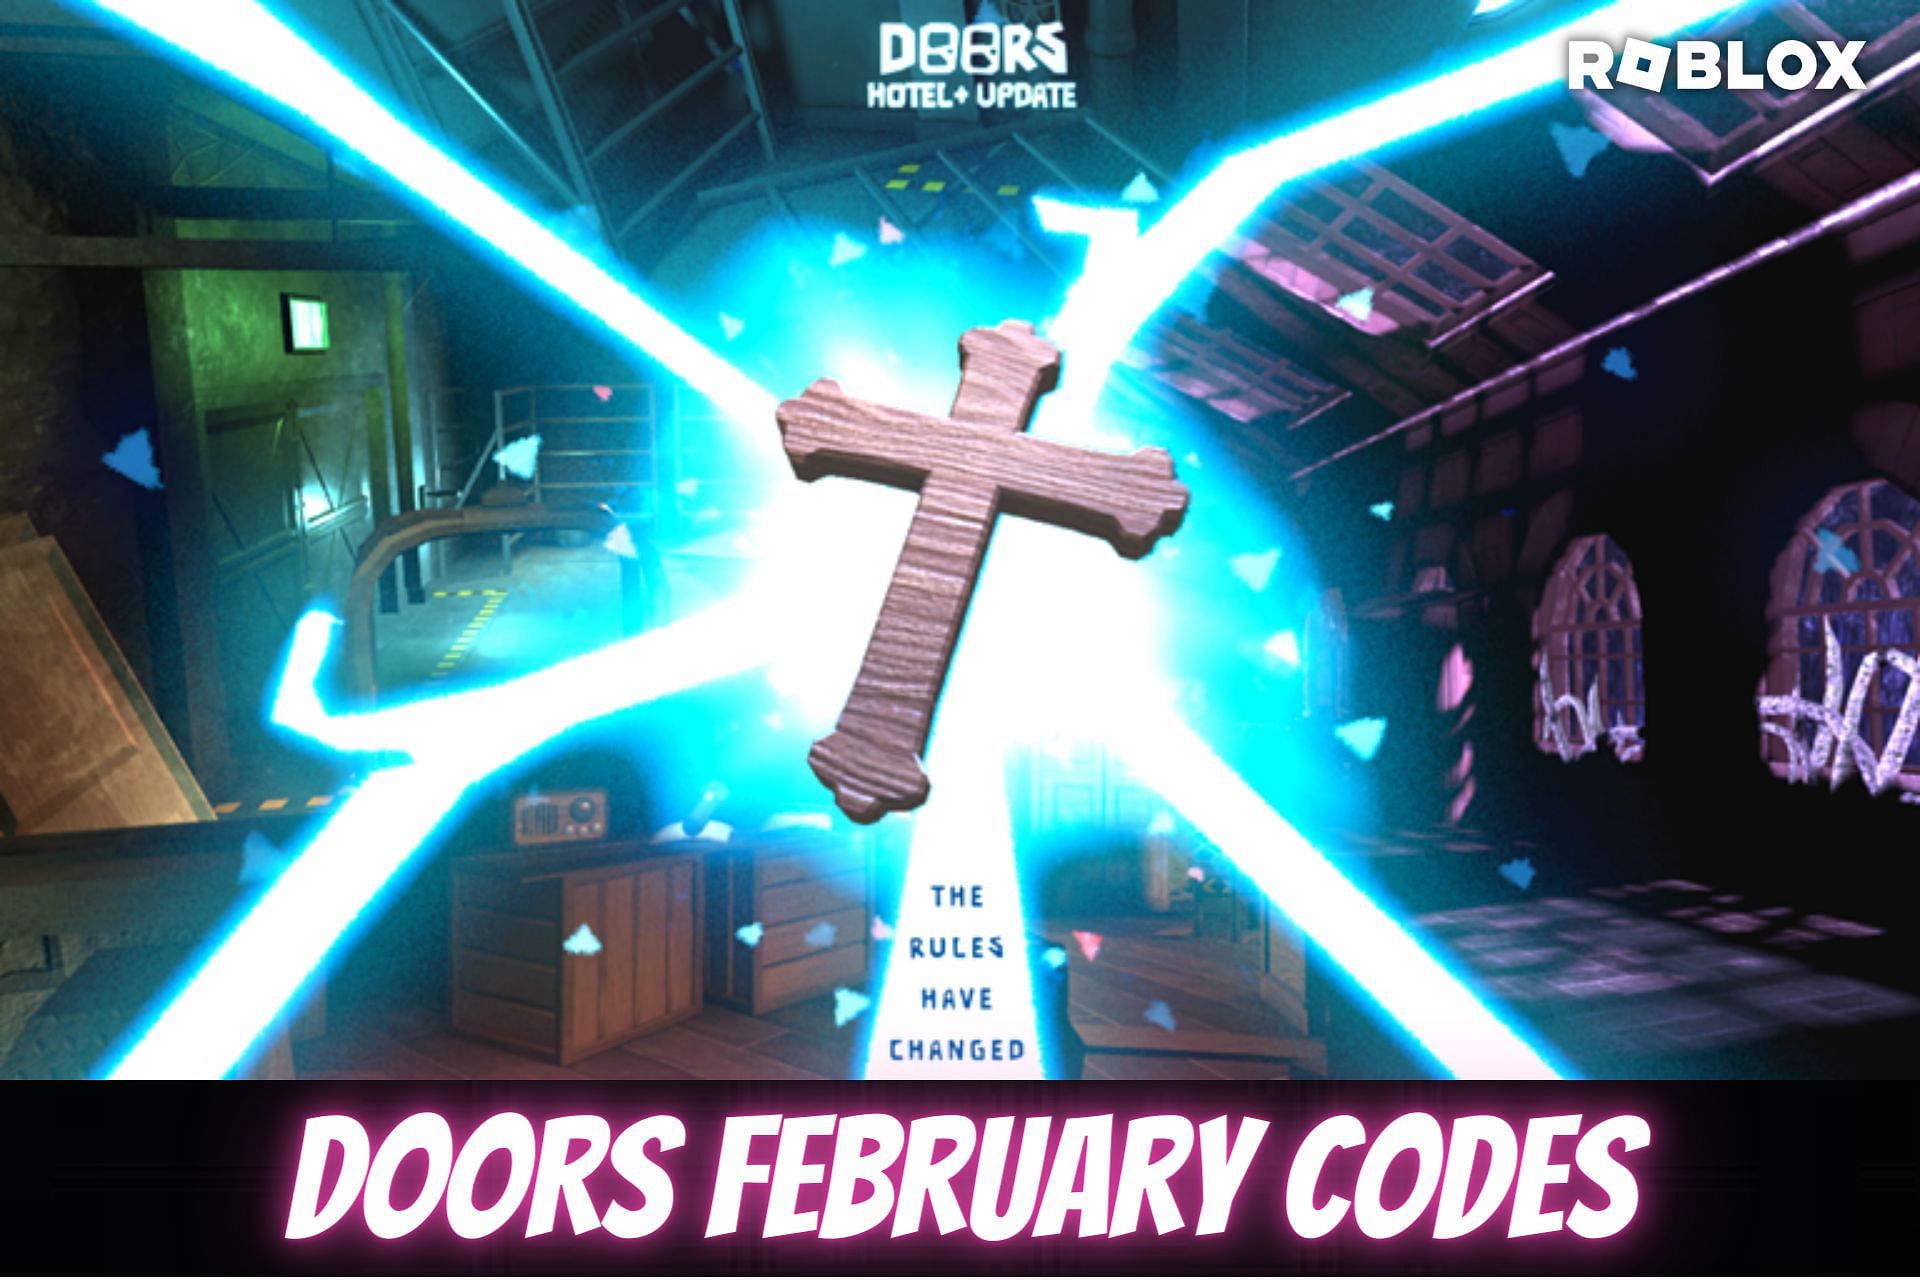 NEW* ALL WORKING CODES FOR DOORS IN 2023 FEBRUARY! ROBLOX DOORS